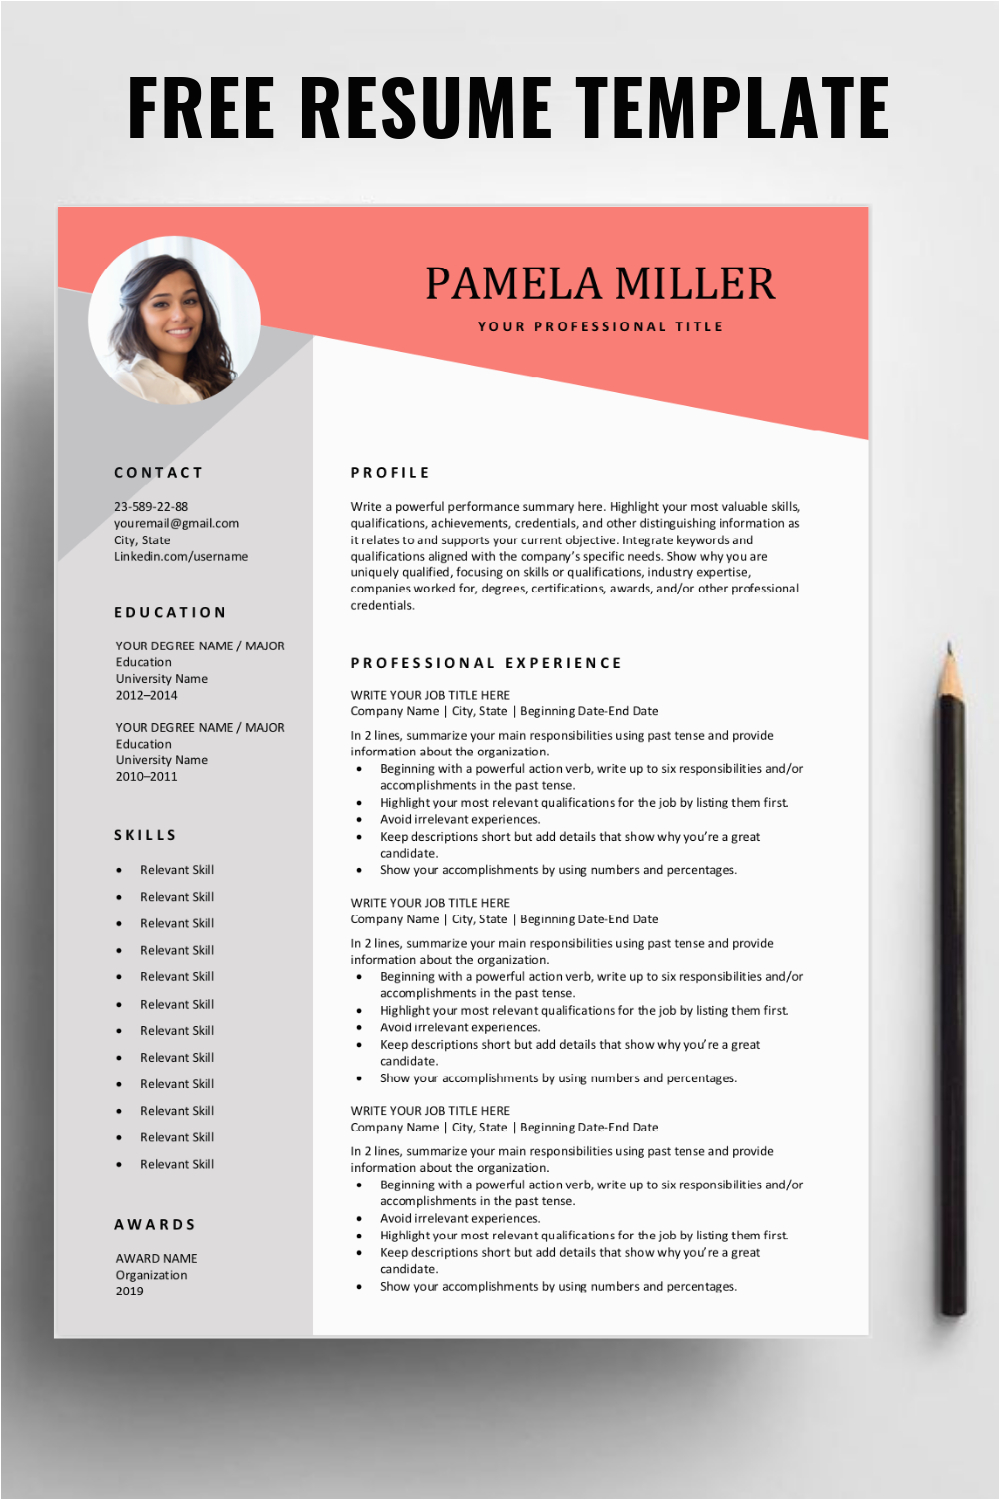 Free Download Resume Template with Picture Free Resume Template